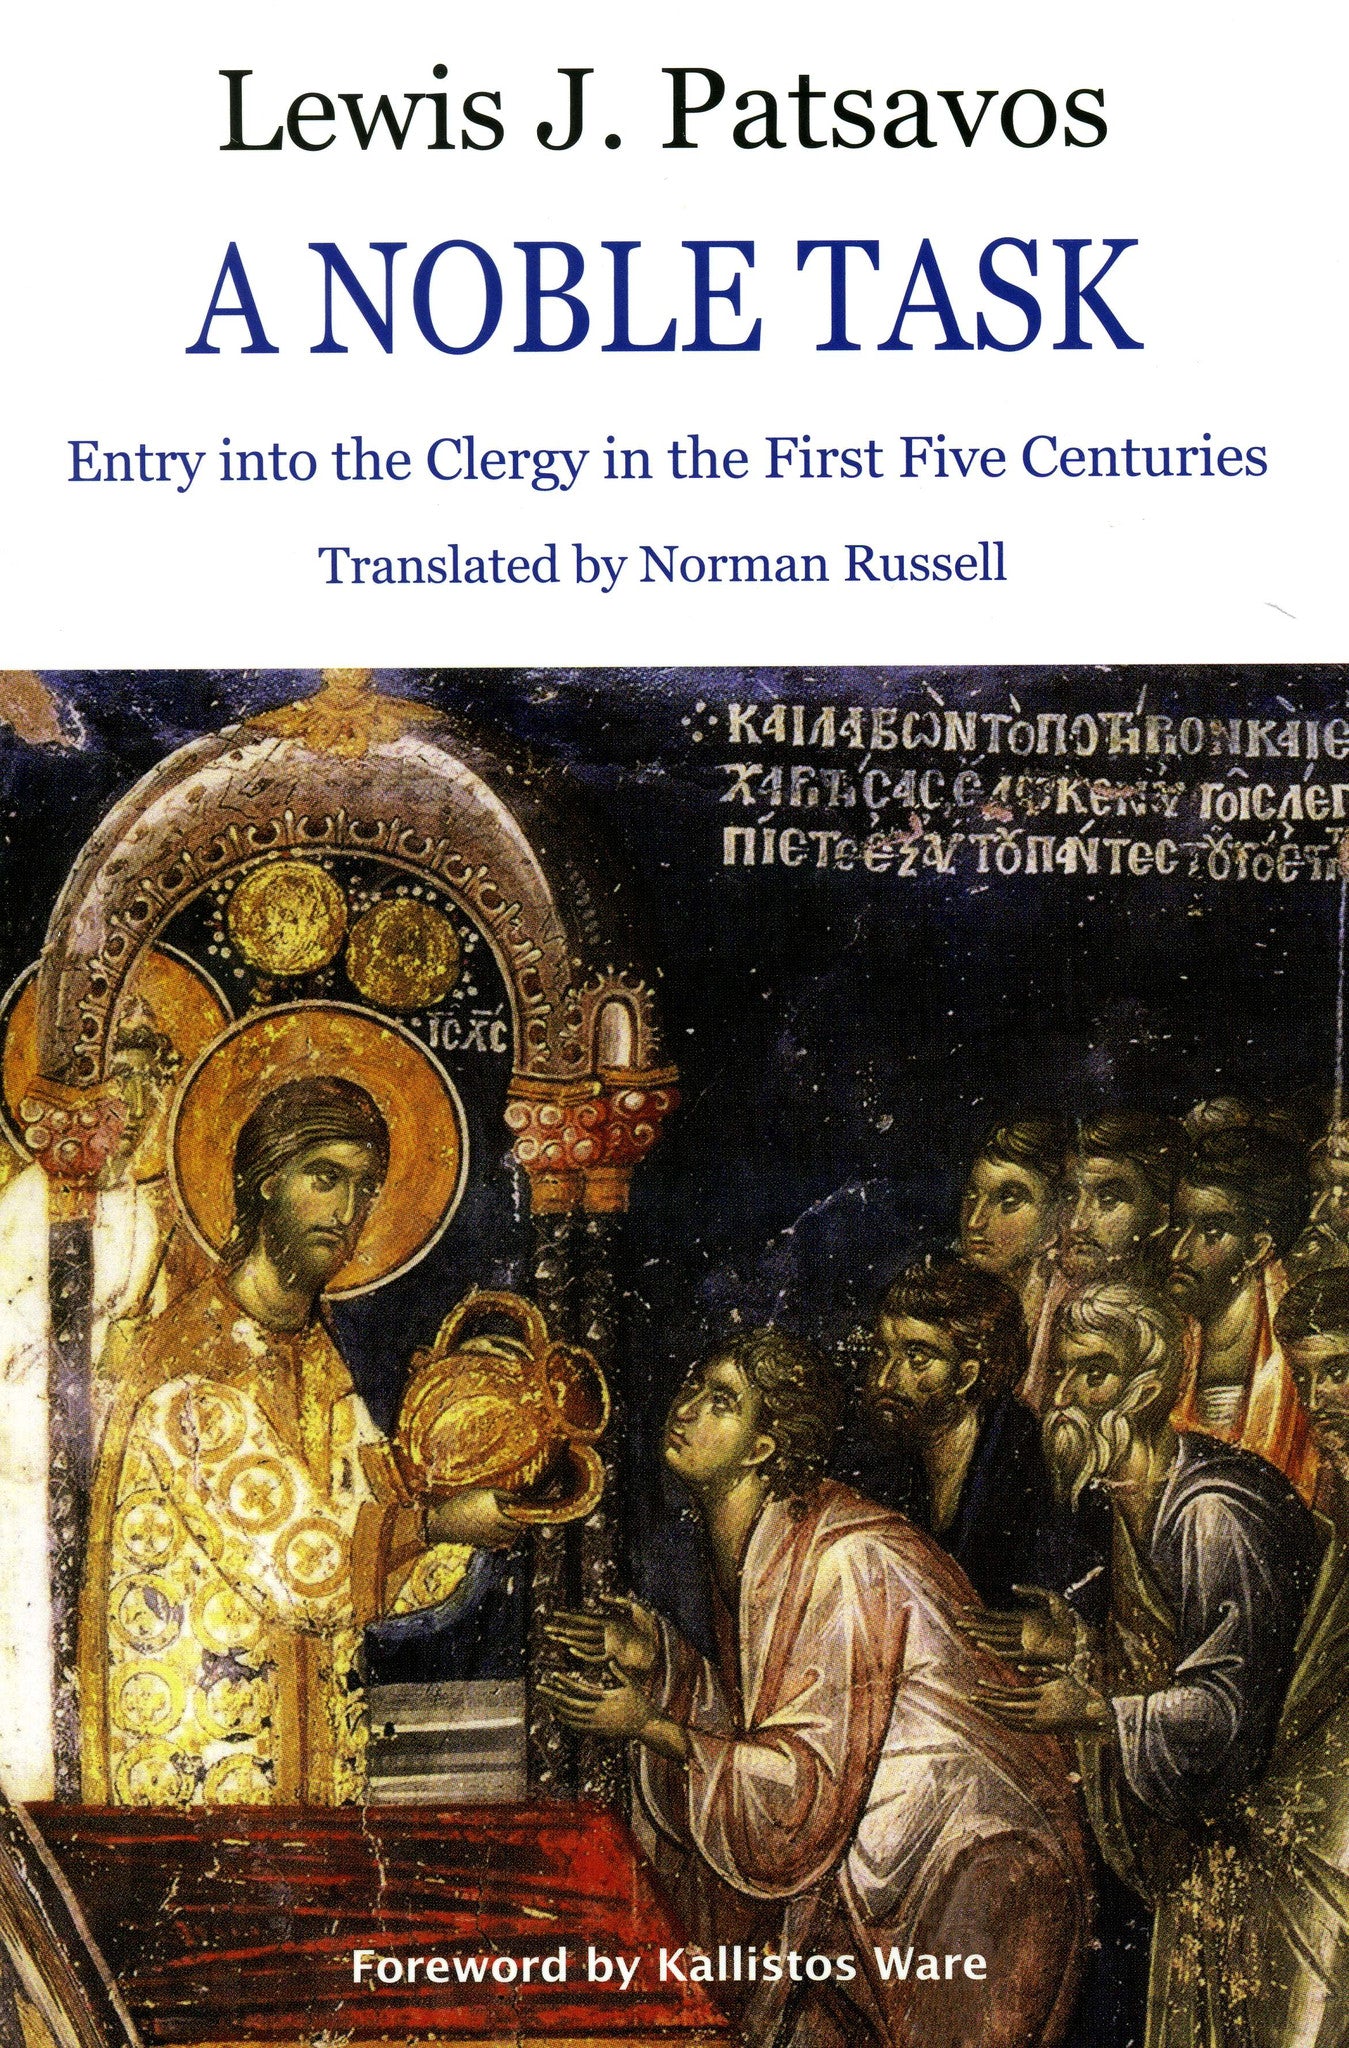 A Noble Task: Entry into the Clergy in the First Five Centuries